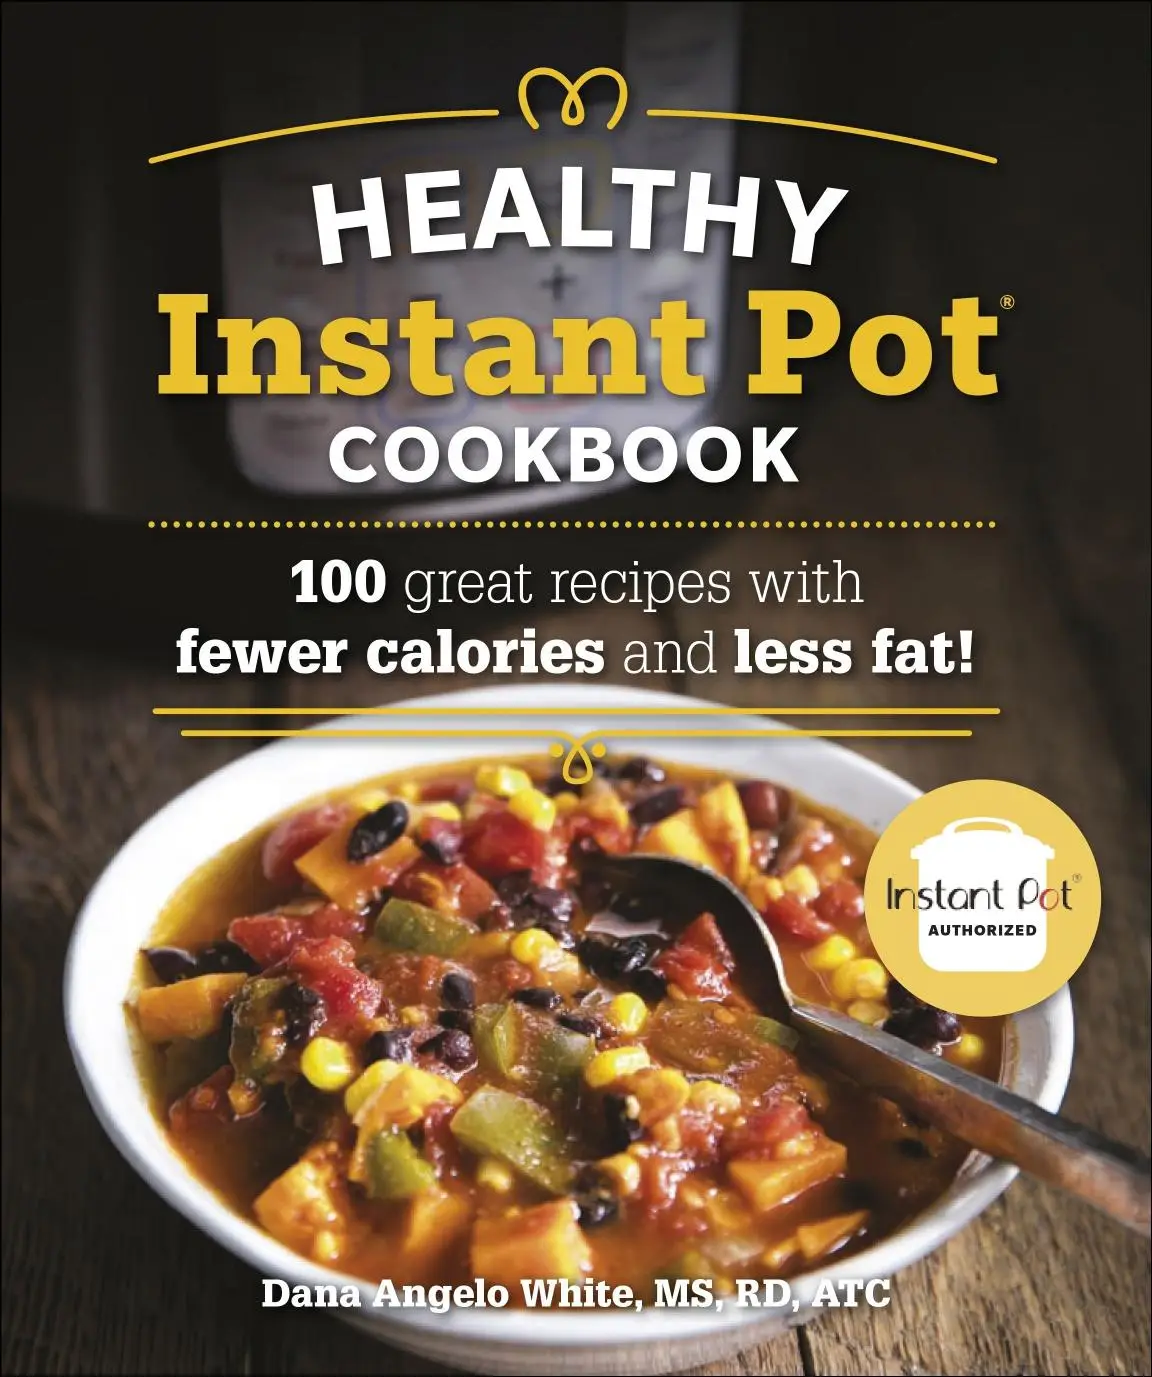 The Healthy Instant Pot Cookbook: 100 great recipes with fewer calories ...